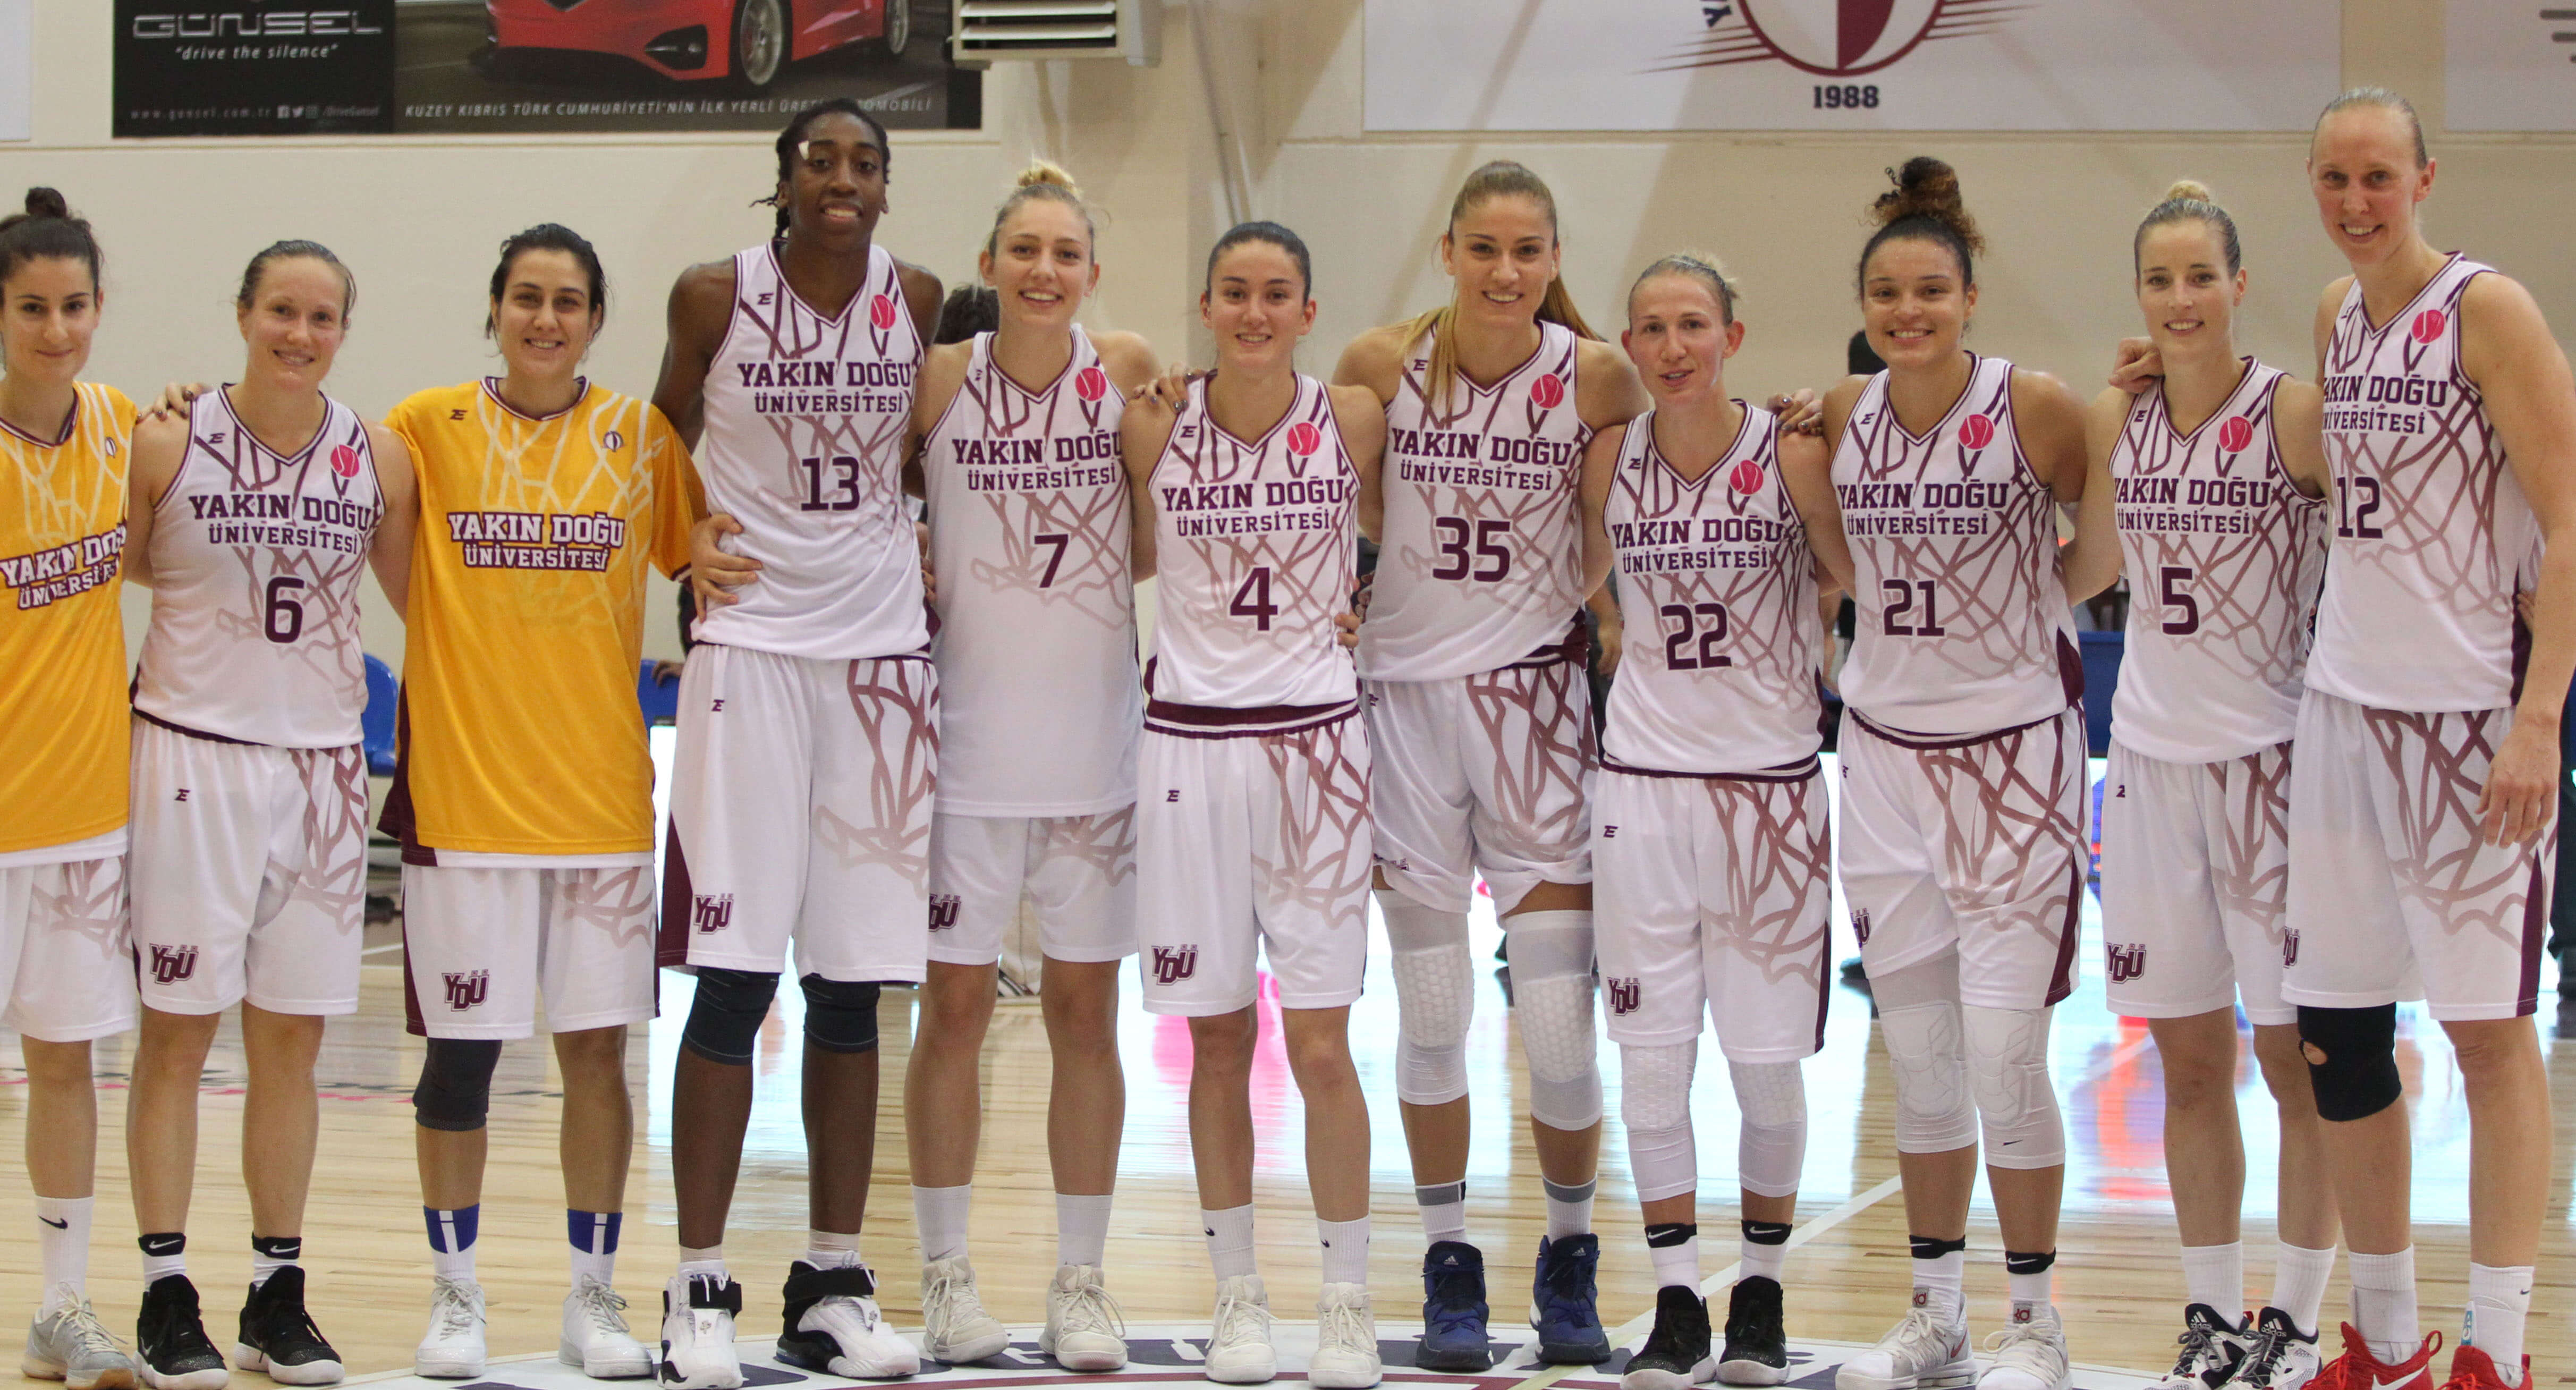 Near East University Women’s Basketball Team faces BLMA for the away game in France